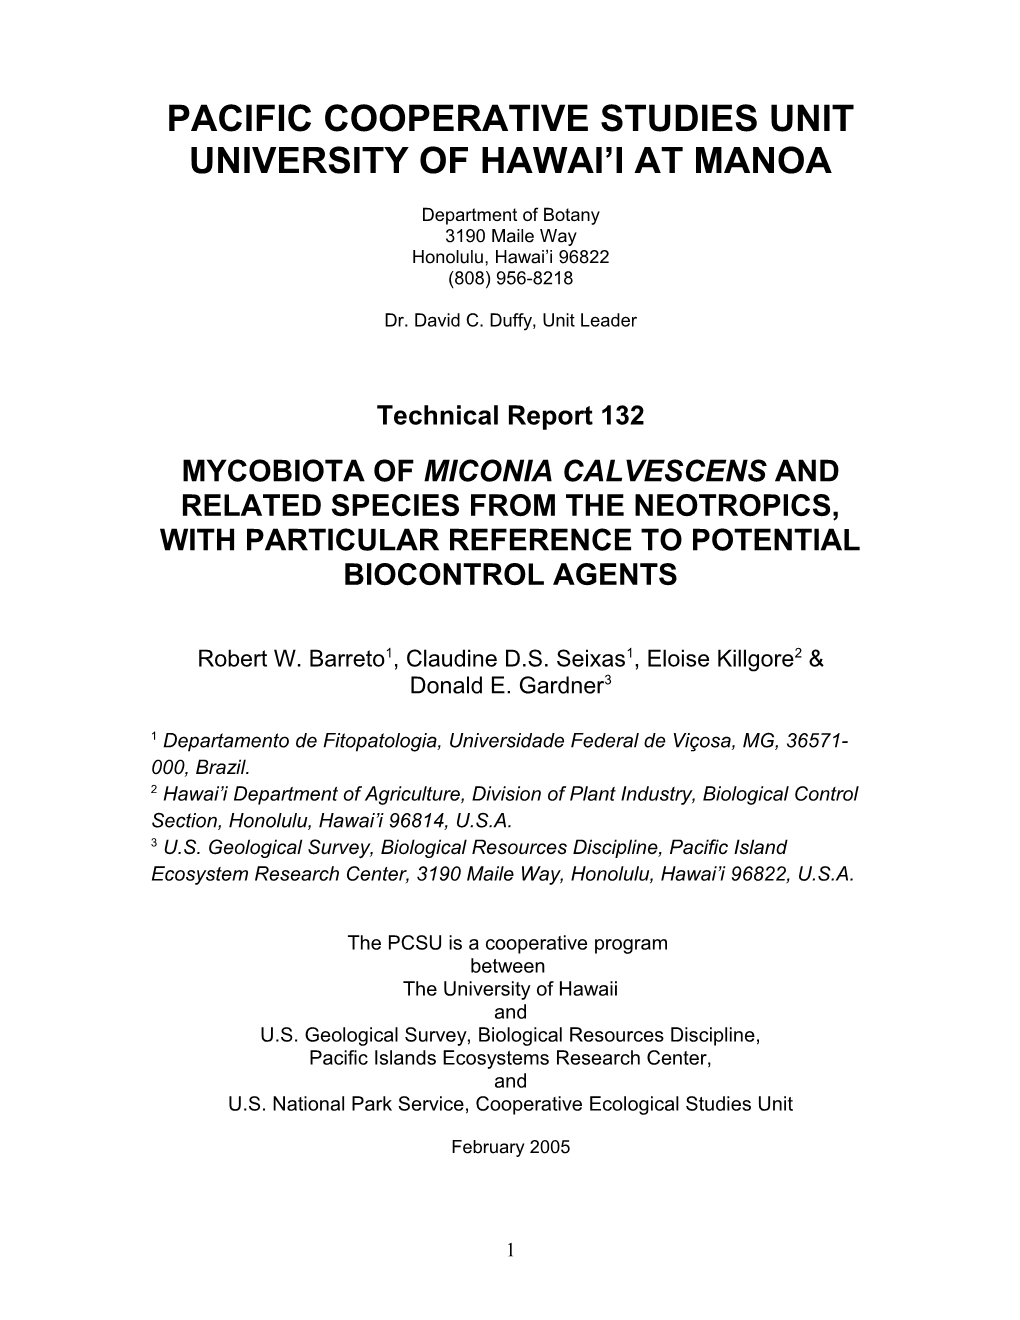 Mycobiota of Miconia Calvescens and Related Species from the Neotropics, with Particular